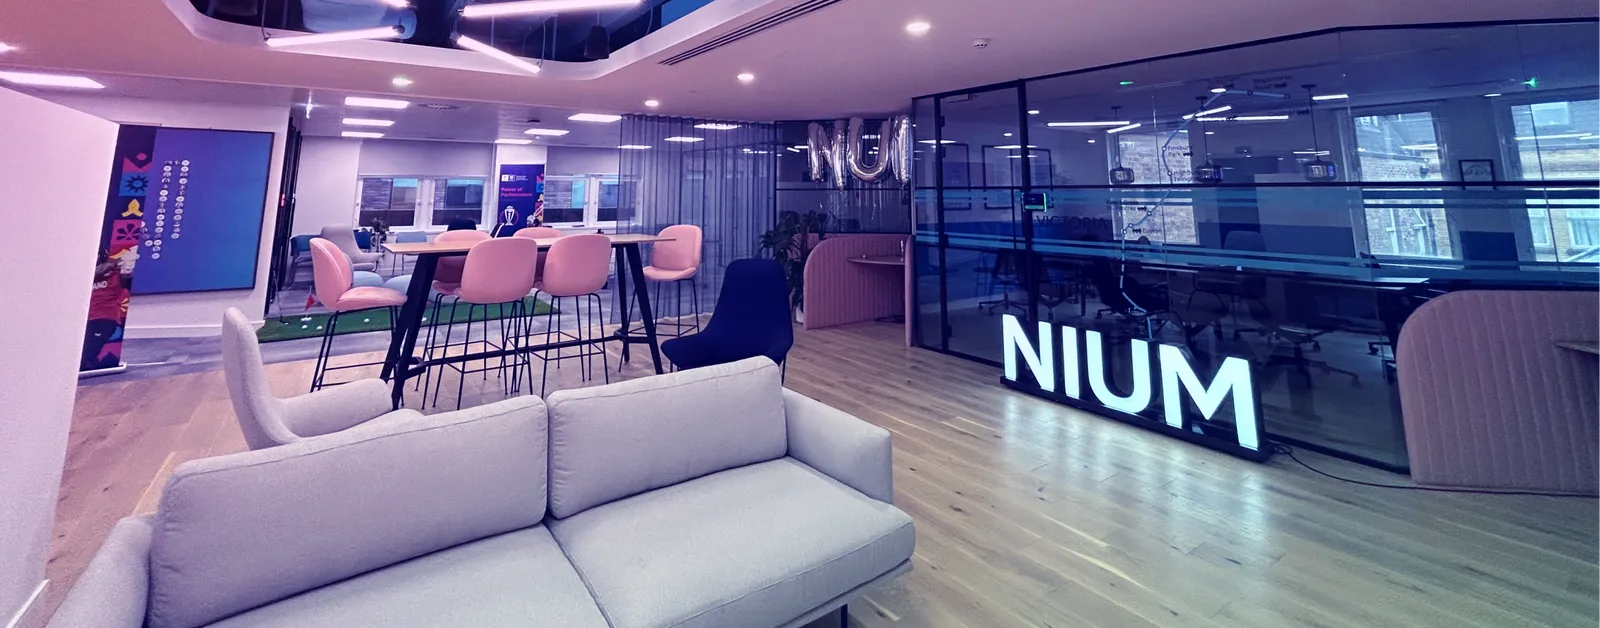 Nium, Expands European Operations with New Regional Headquarters in London’s Square Mile